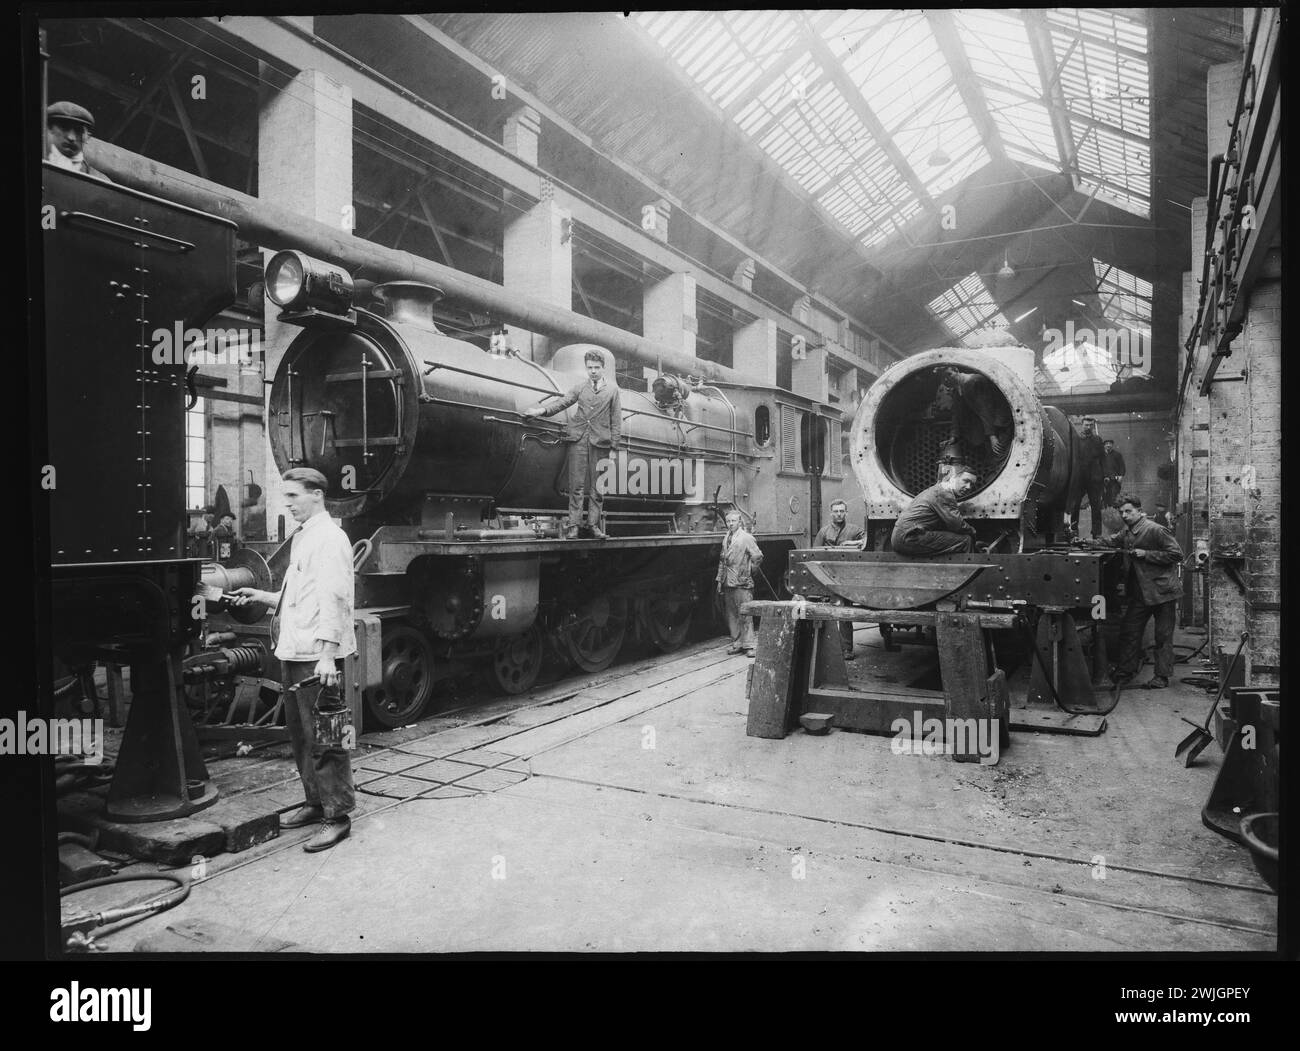 BAGNALL'S ENGINE WORKS STAFFORD GLASS PLATE NEGATIVES. These Glass Plates were rescued, pending being skipped way back and are of images taken between the two world wars. Showing amazing features and staff of the factory back in time. Some wonderful images that I have painstakingly digitalised. Very rare. Stock Photo